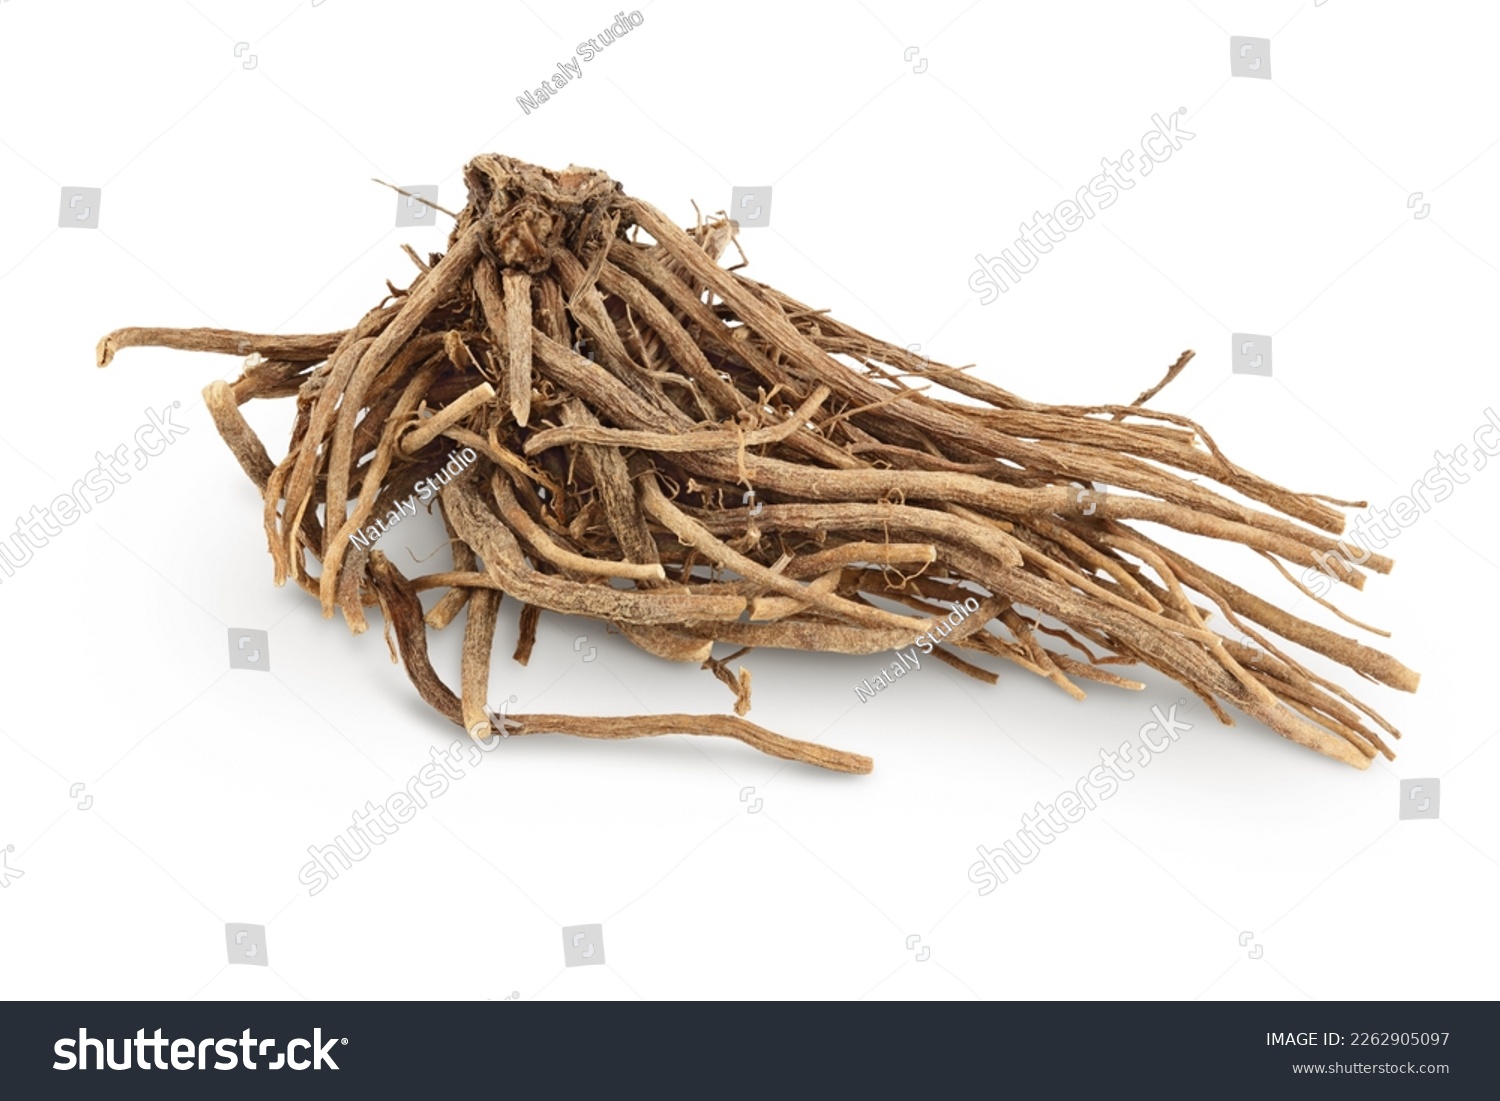 Dried Valerian root isolated on white background. Valeriana officinalis with full depth of field. #2262905097